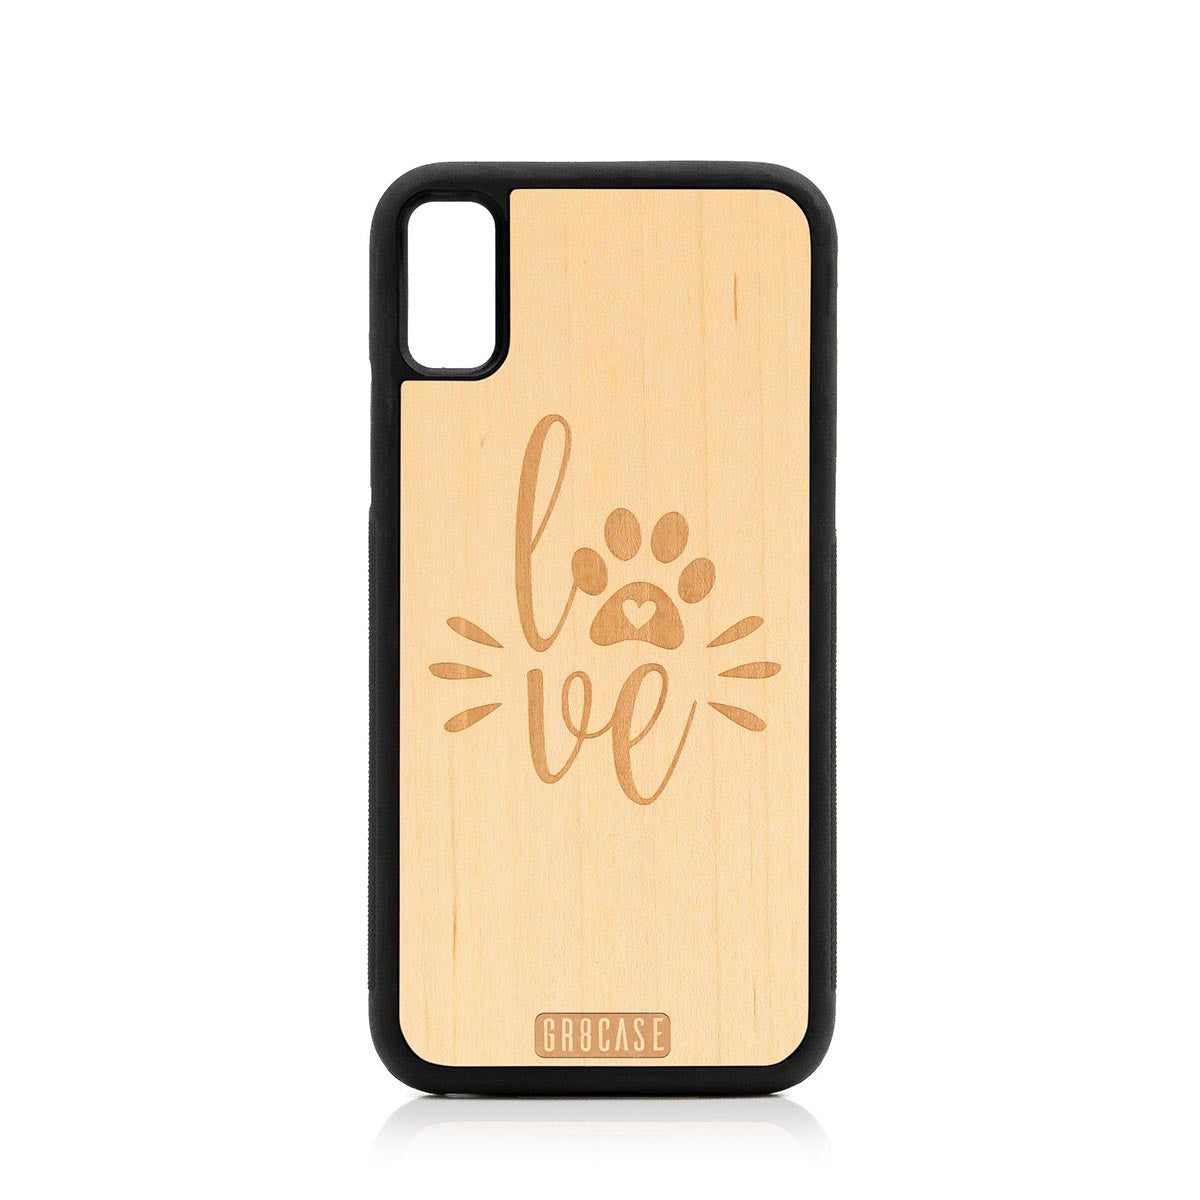 Paw Love Design Wood Case For iPhone XS Max by GR8CASE